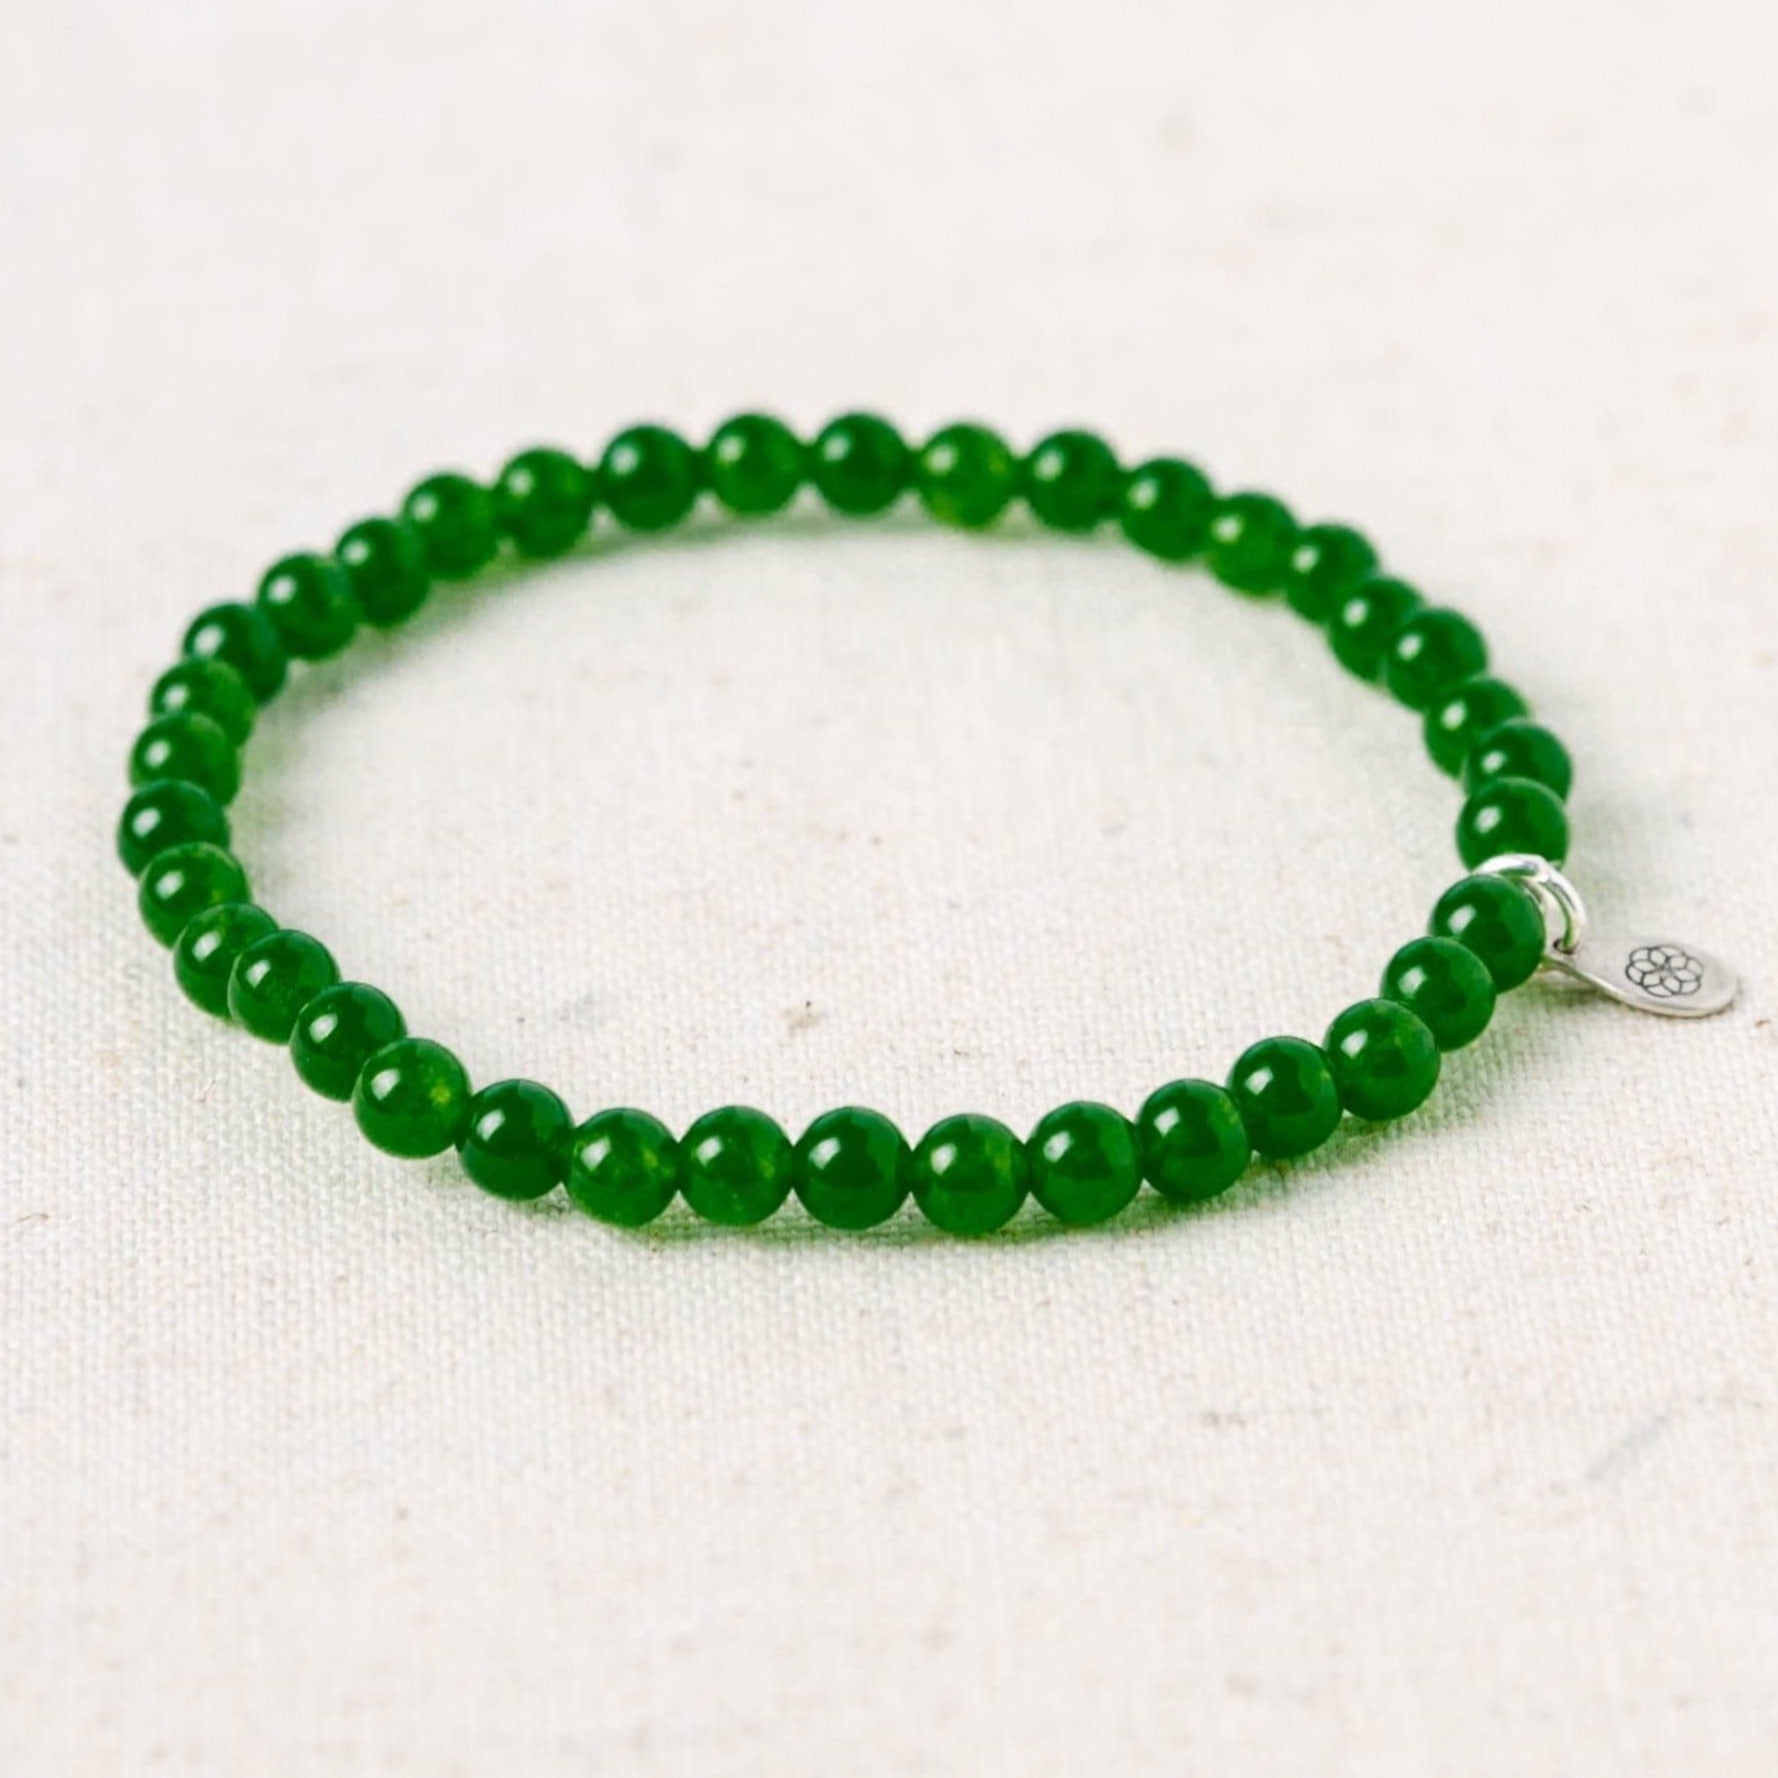 Buy Capricorn Birthstone - Green Jade Bracelet - Crystal Bracelet - Crystal  Bangles - Bracelet for Women - for Good Luck - Stretchable - for Healing  and Meditation - with Tumble Pendant Online In India At Discounted Prices